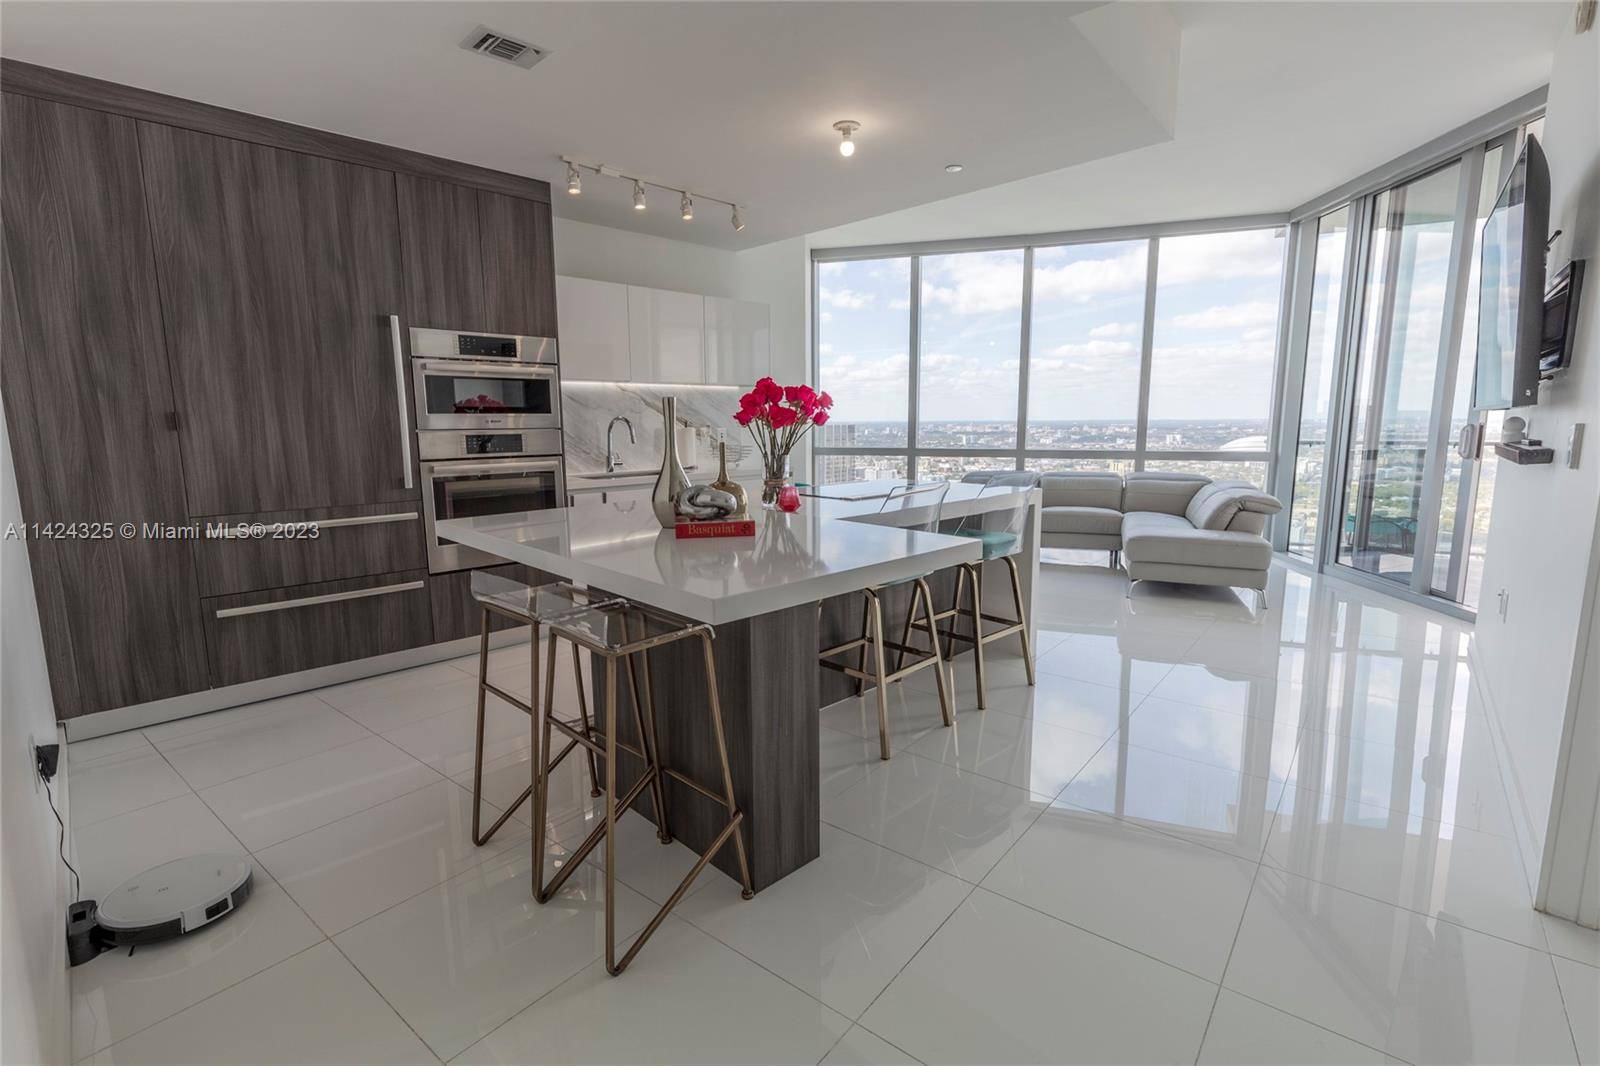 Experience unparalleled elegance on the 44th floor of Paramount Miami World Center.